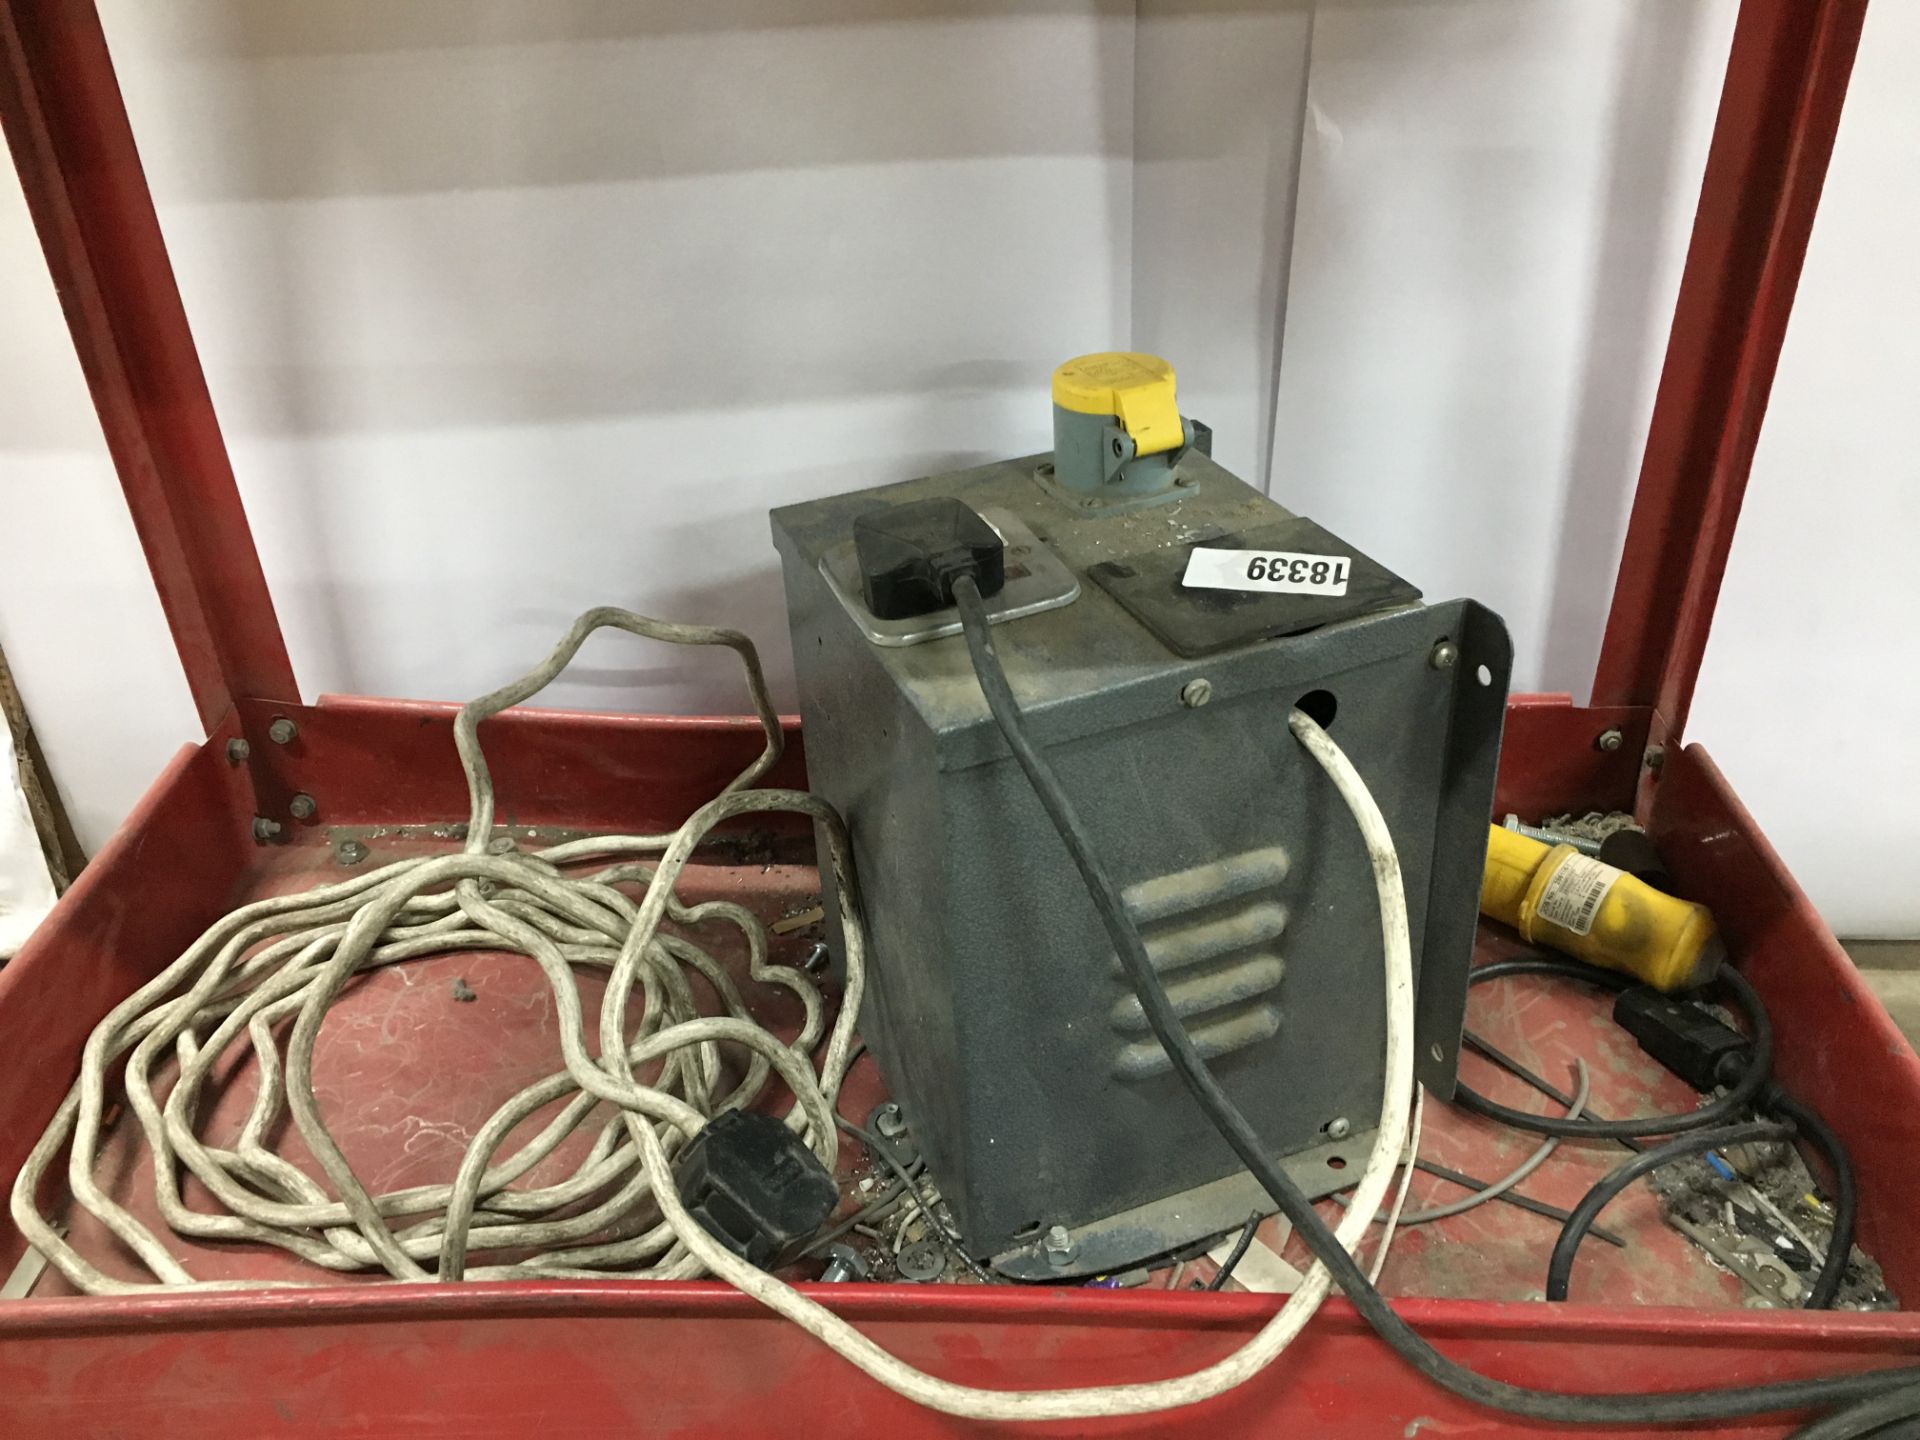 Taylor Studwelding T-ARC System 4 CD Stud Welder with Trolley - Image 7 of 7